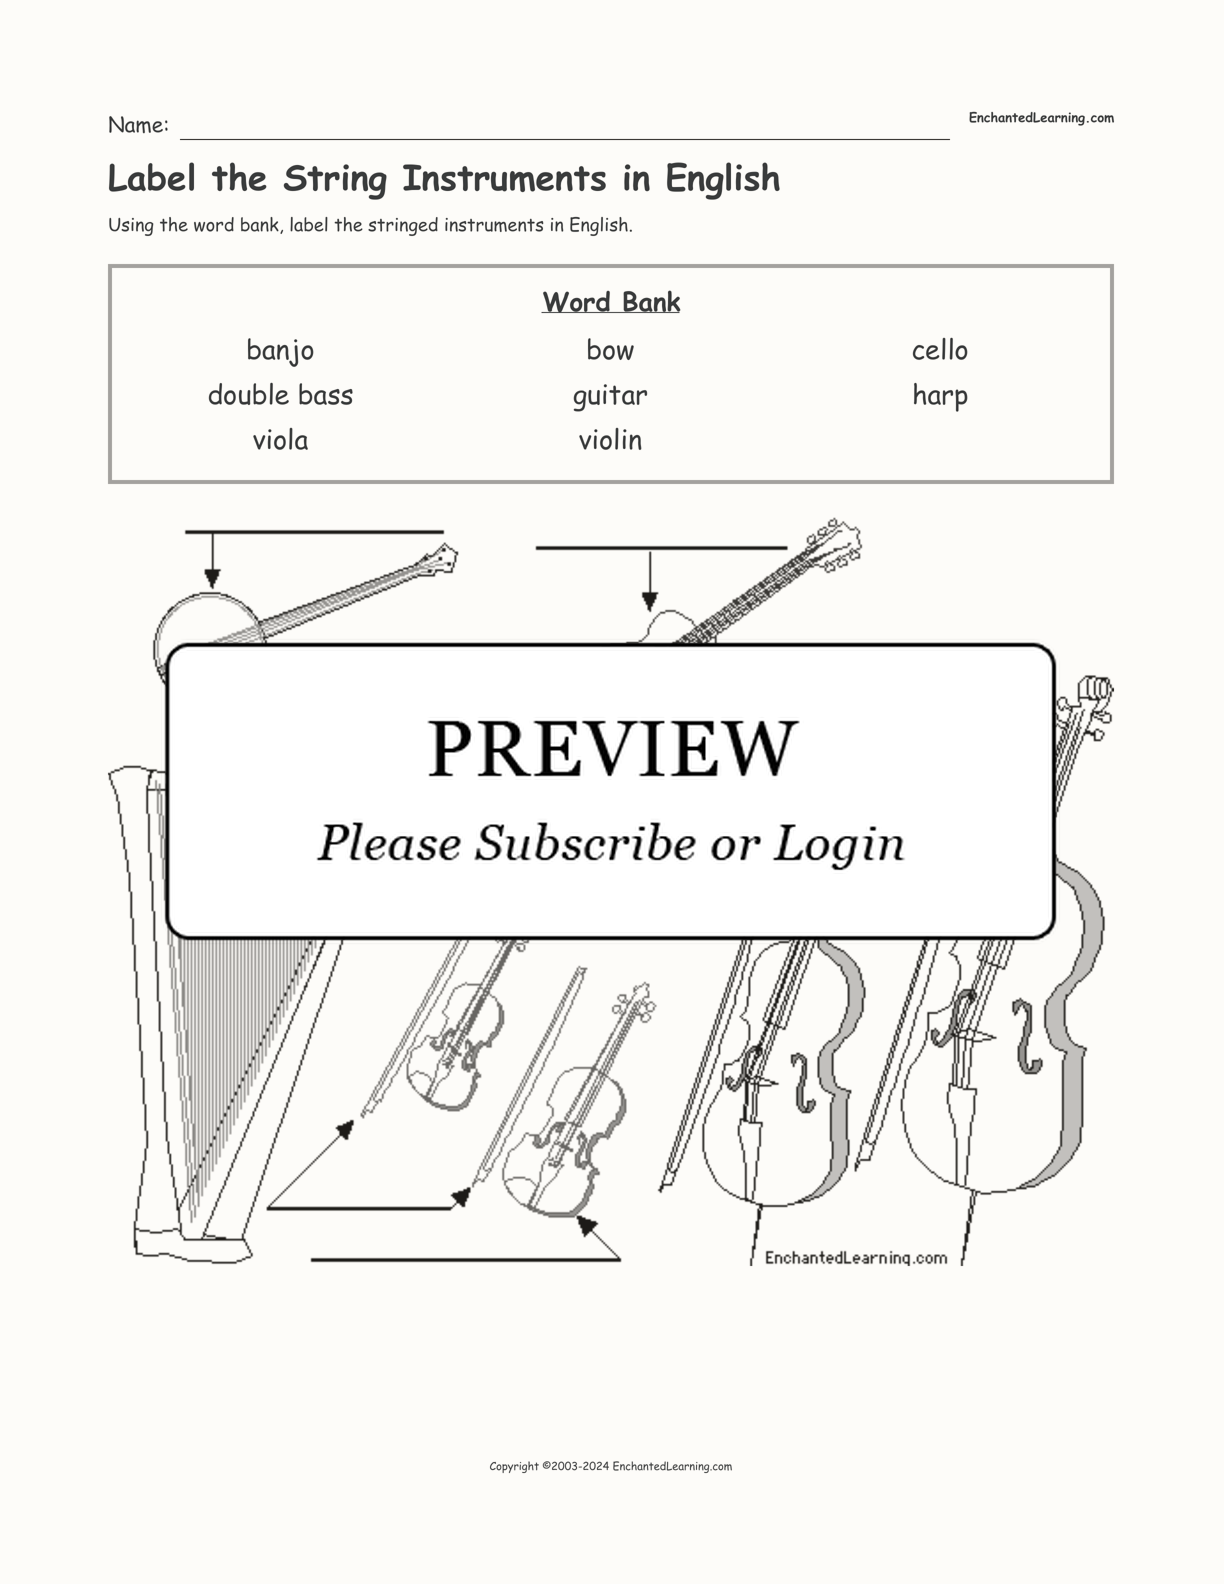 Label the String Instruments in English - Enchanted Learning